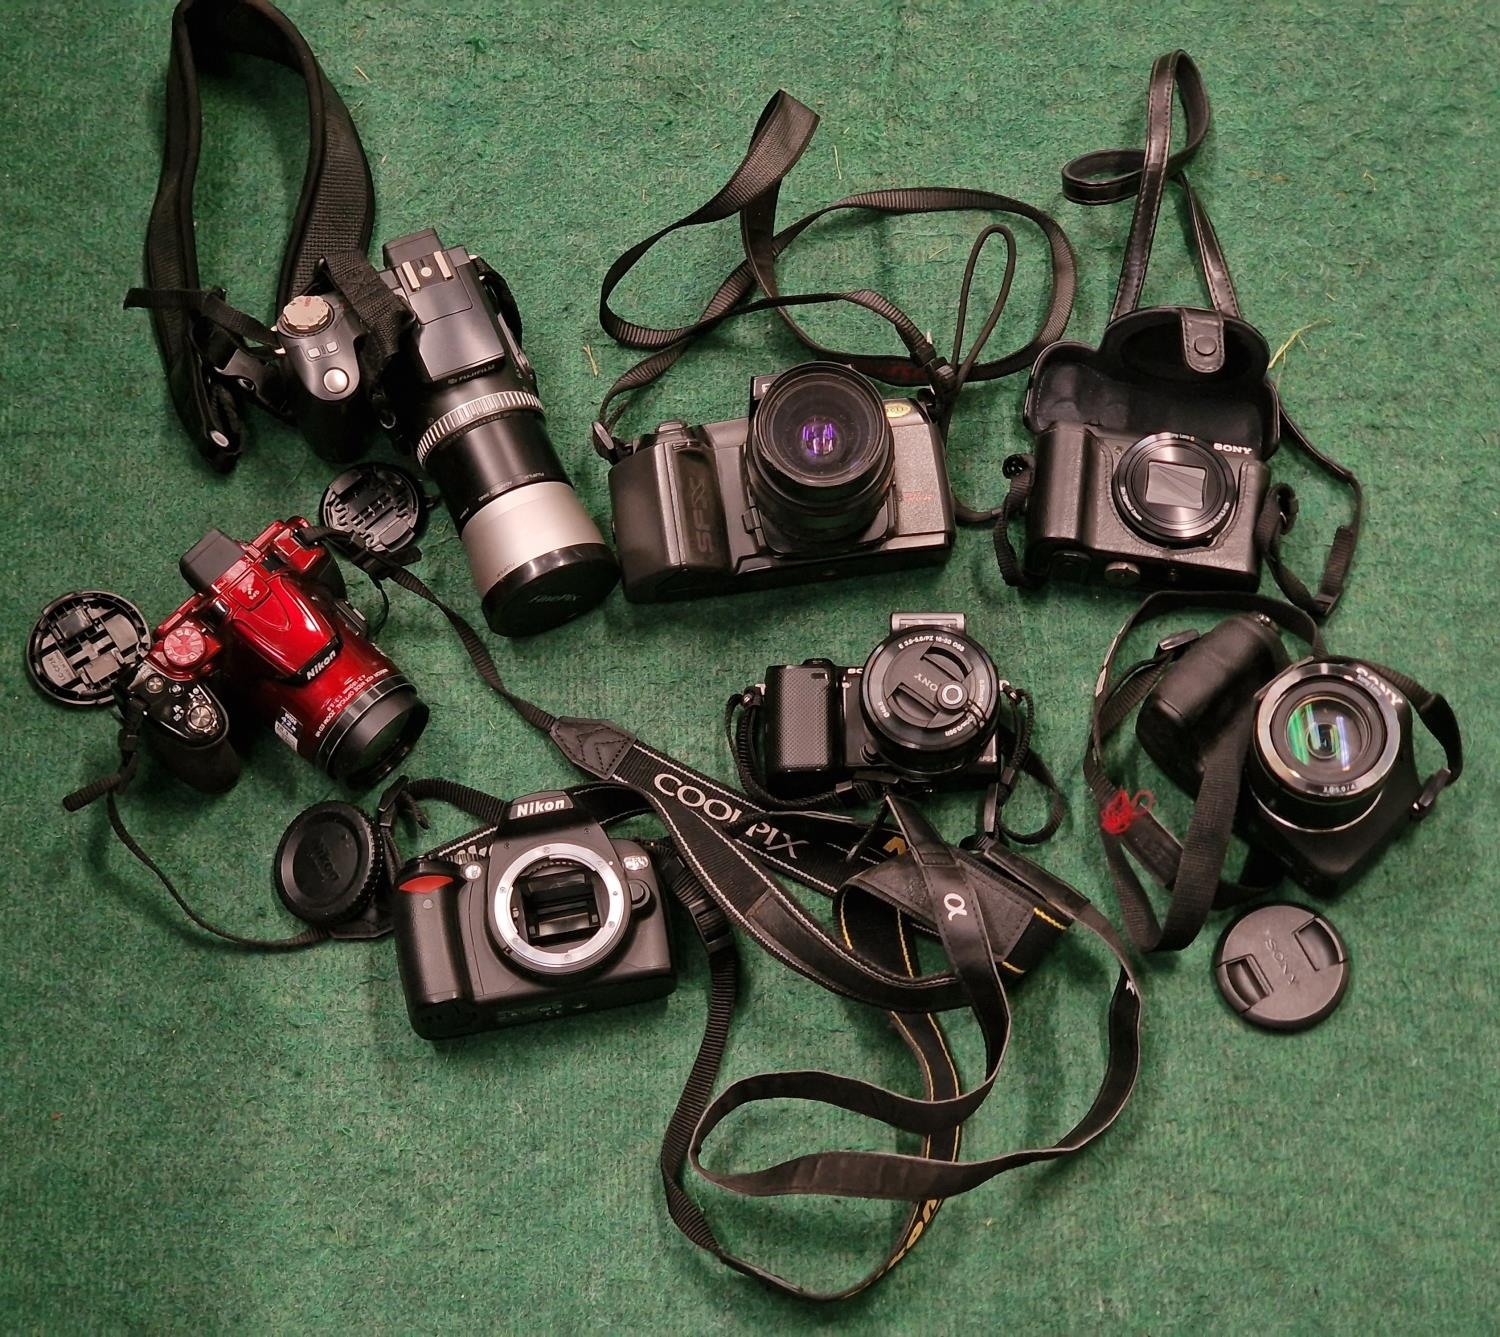 Selection OF 7 various cameras. Here we have makes - Nikon D60 -Sony DSC H300 - Sony Self 1650 -